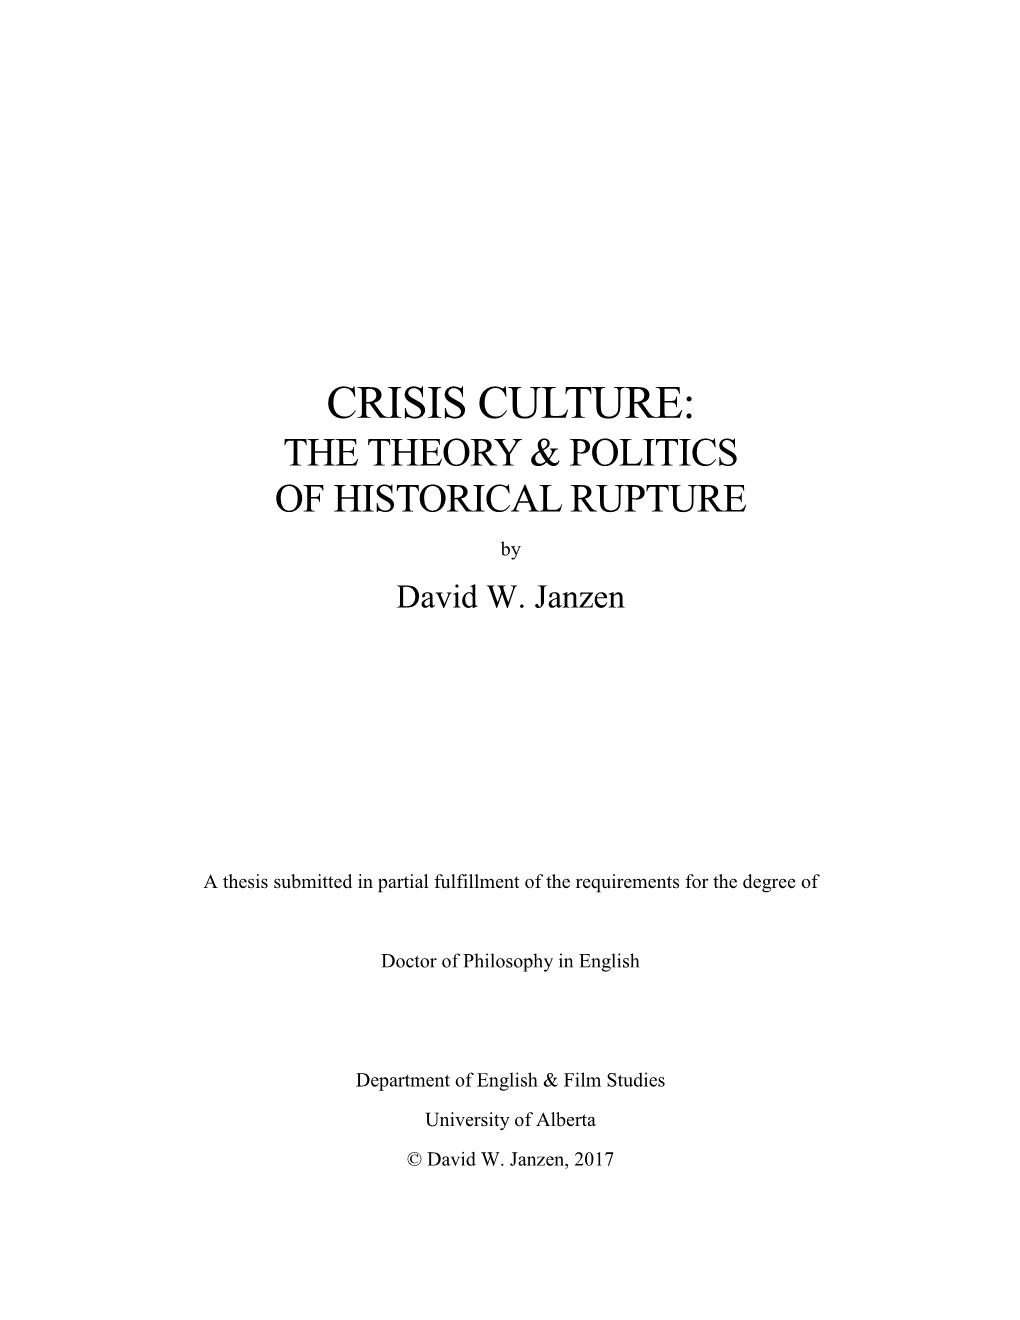 CRISIS CULTURE: the THEORY & POLITICS of HISTORICAL RUPTURE by David W